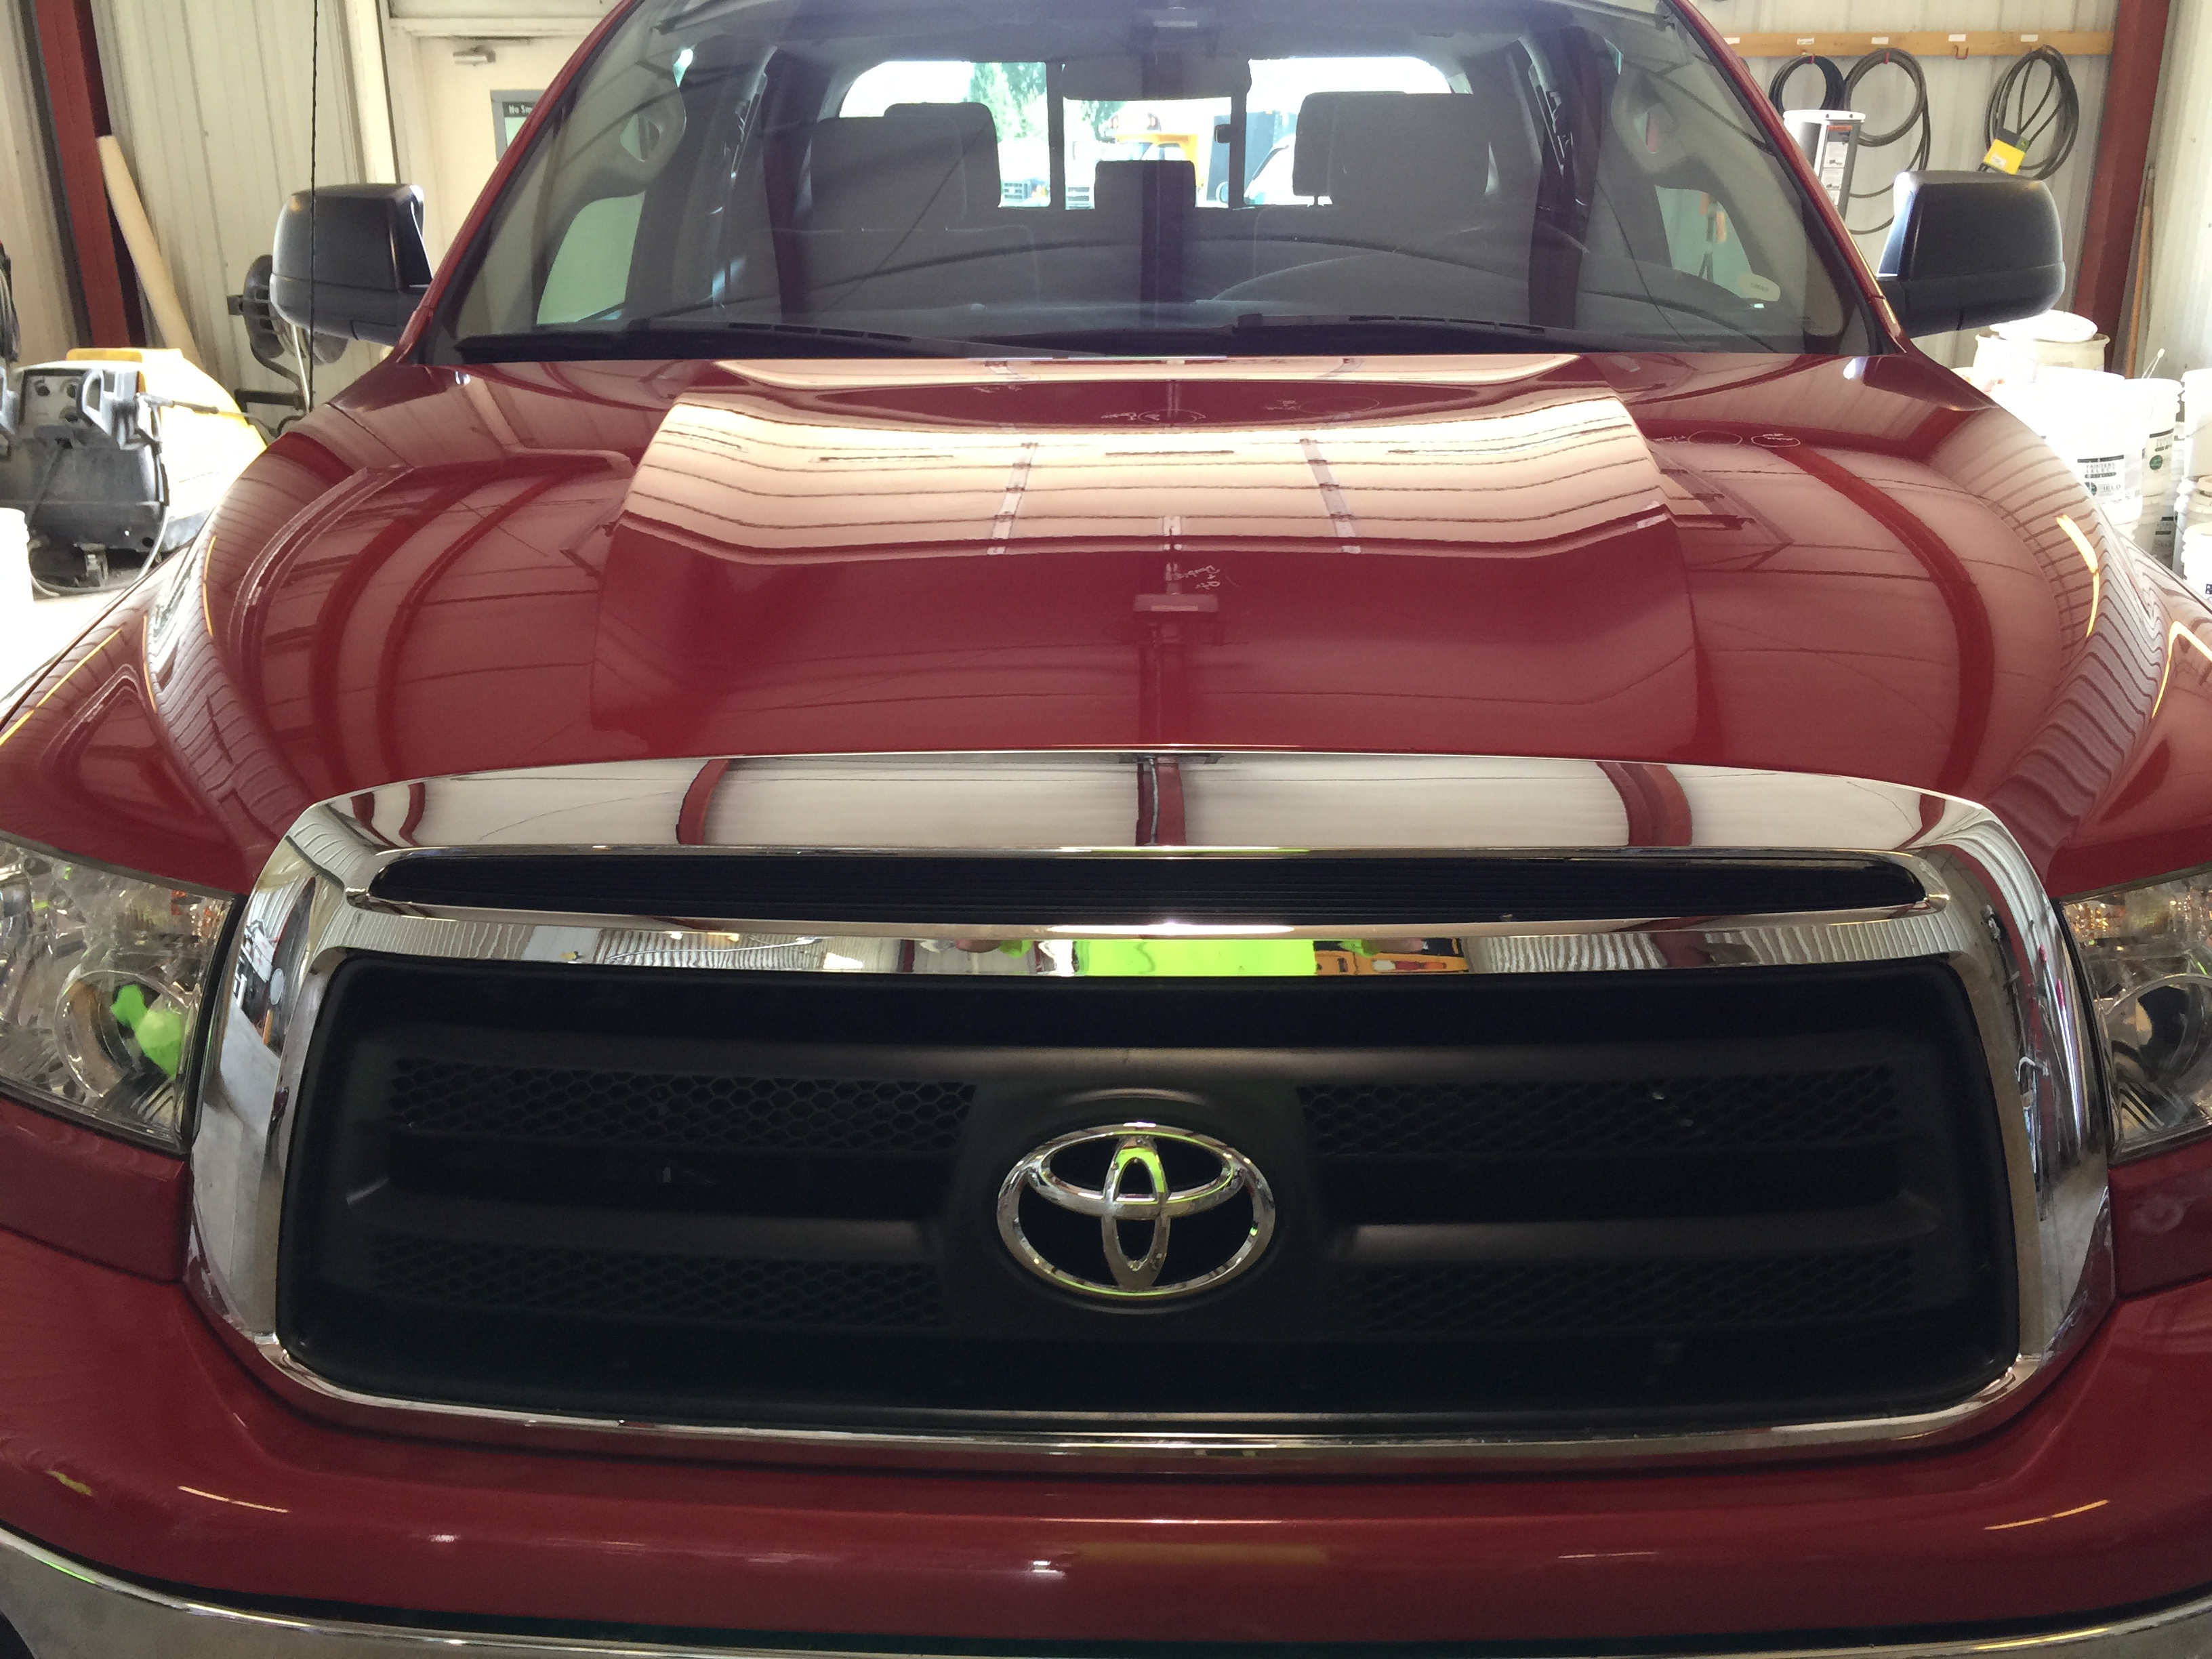 2010 Toyota Tundra, Hail Damage Removal by Michael Bocek out of Springfield, IL, Mobile Dent Repair, Mobile Hail Repair, Paintless dent removal, Springfield, IL, Decatur IL, Athens, IL, Bloomington, IL. http://217dent.com